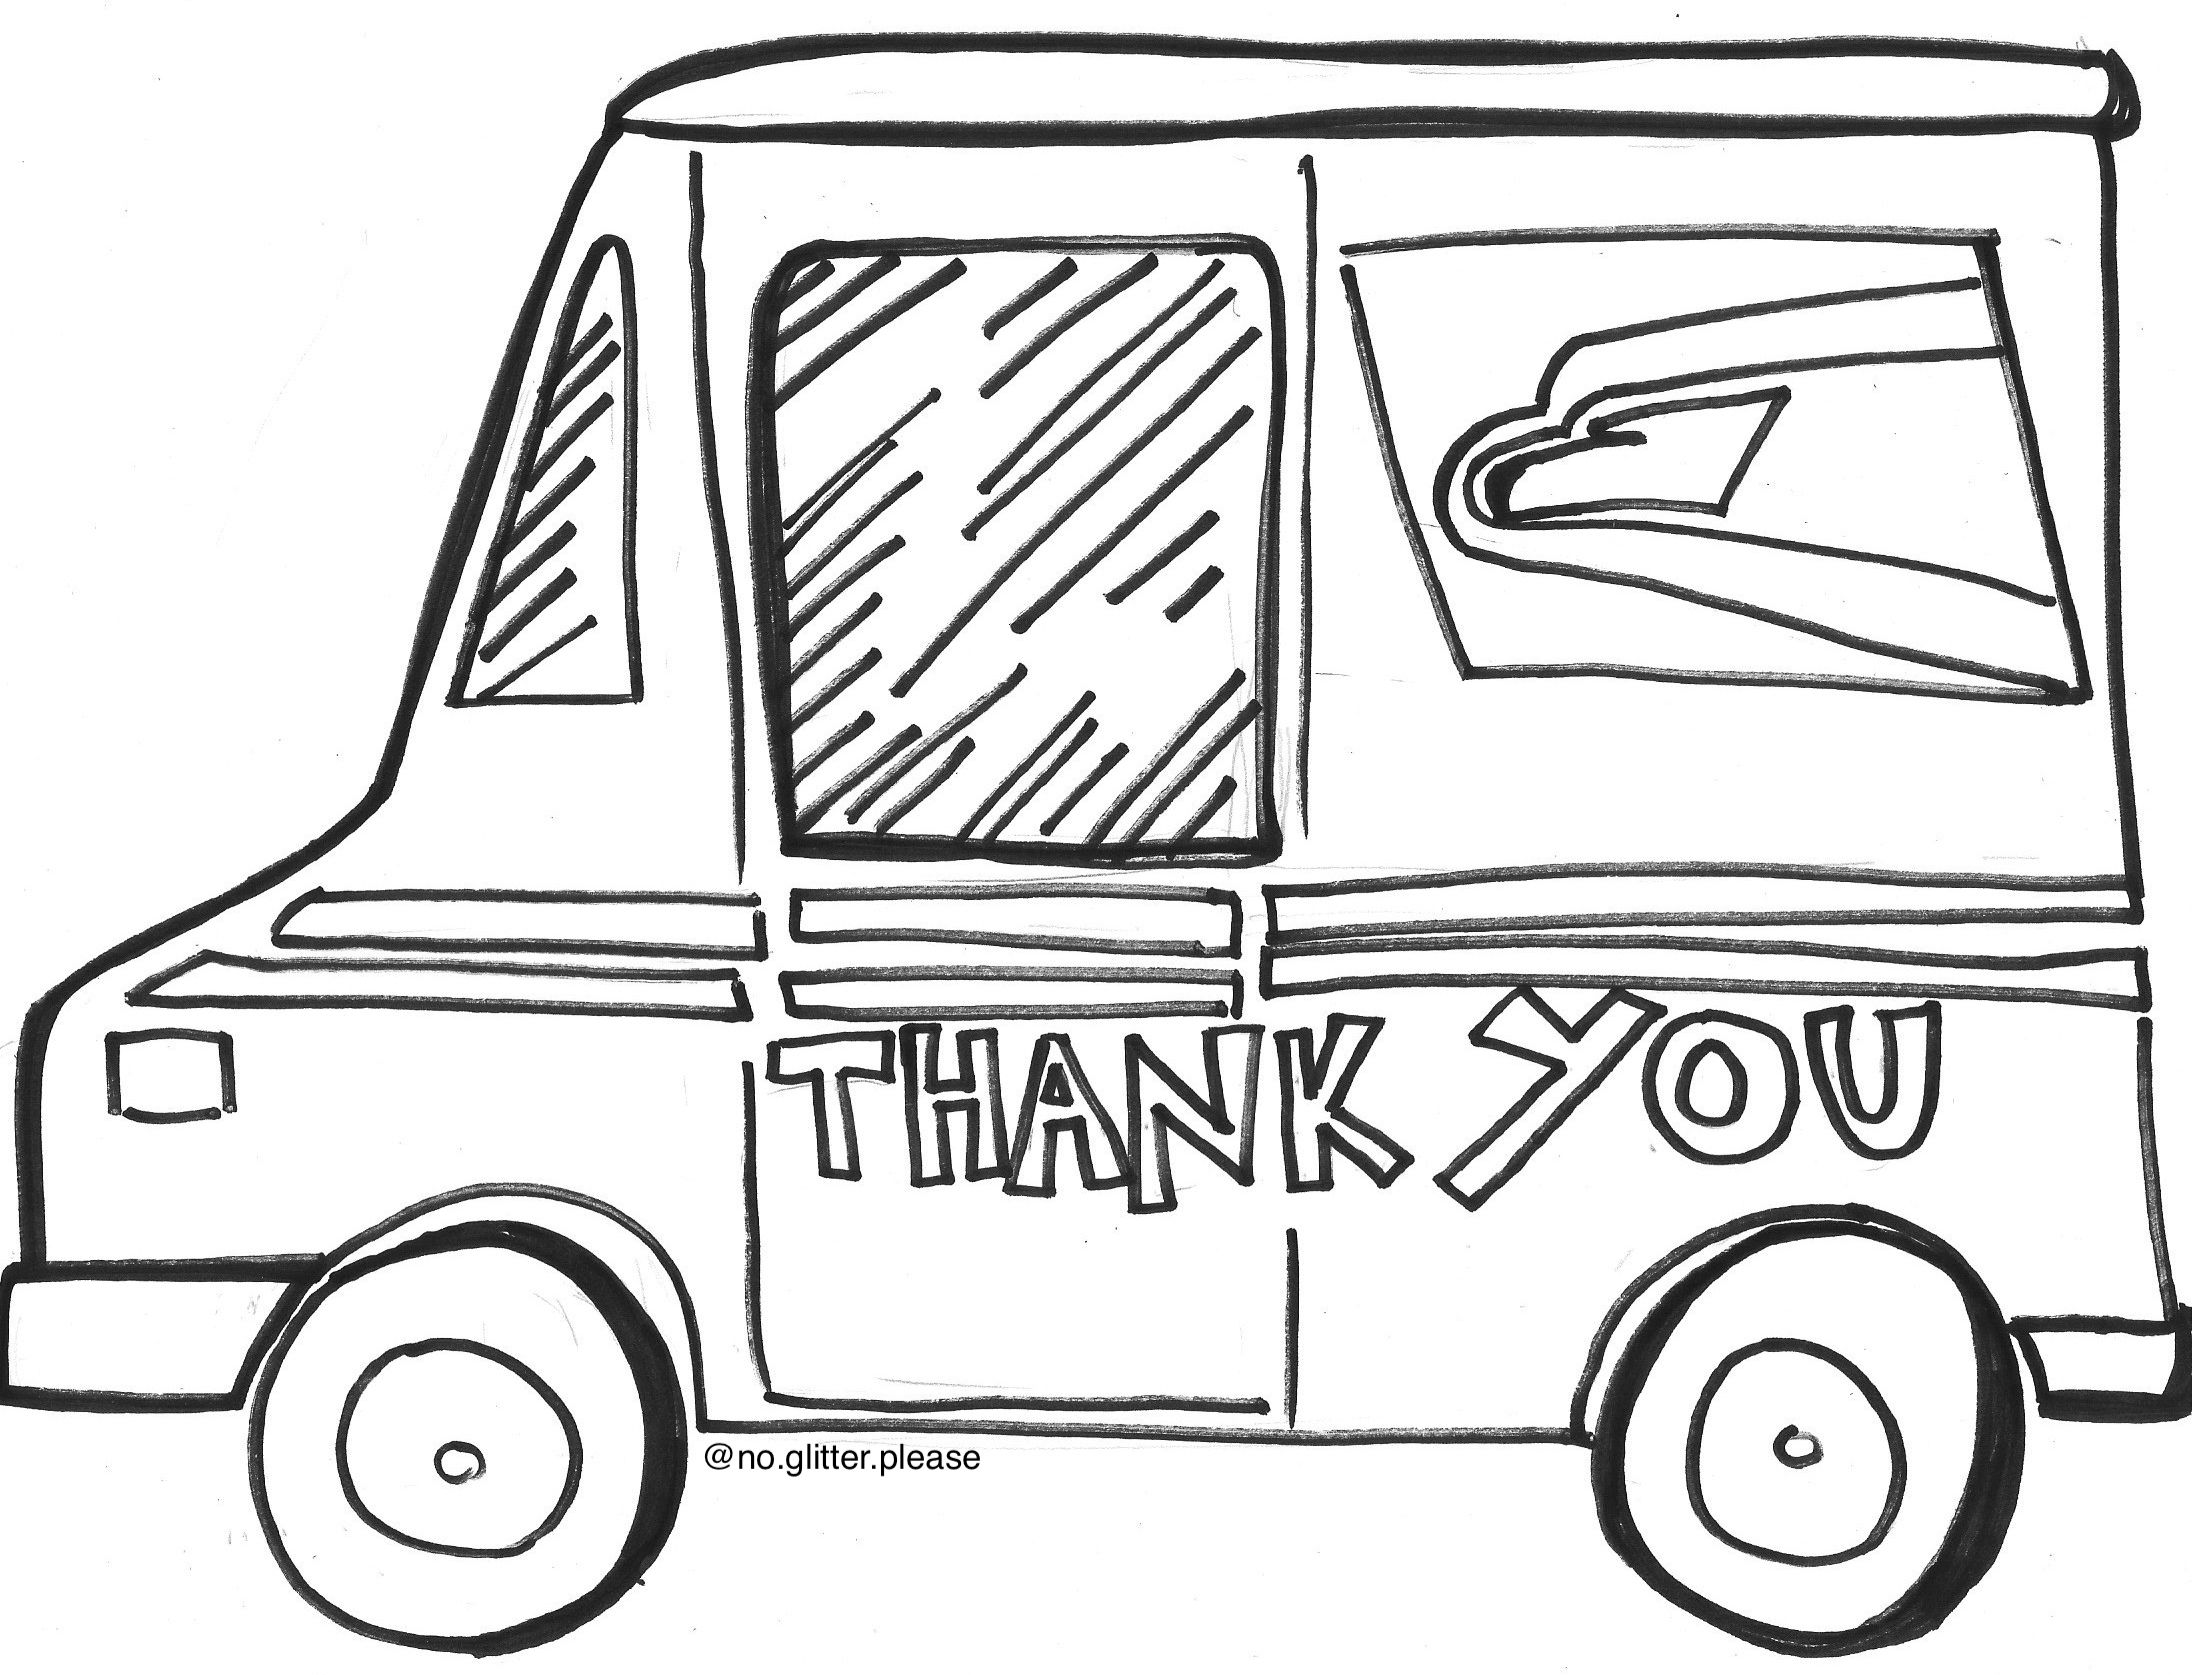 Thank you mail truck truck coloring pages mail truck projects for kids